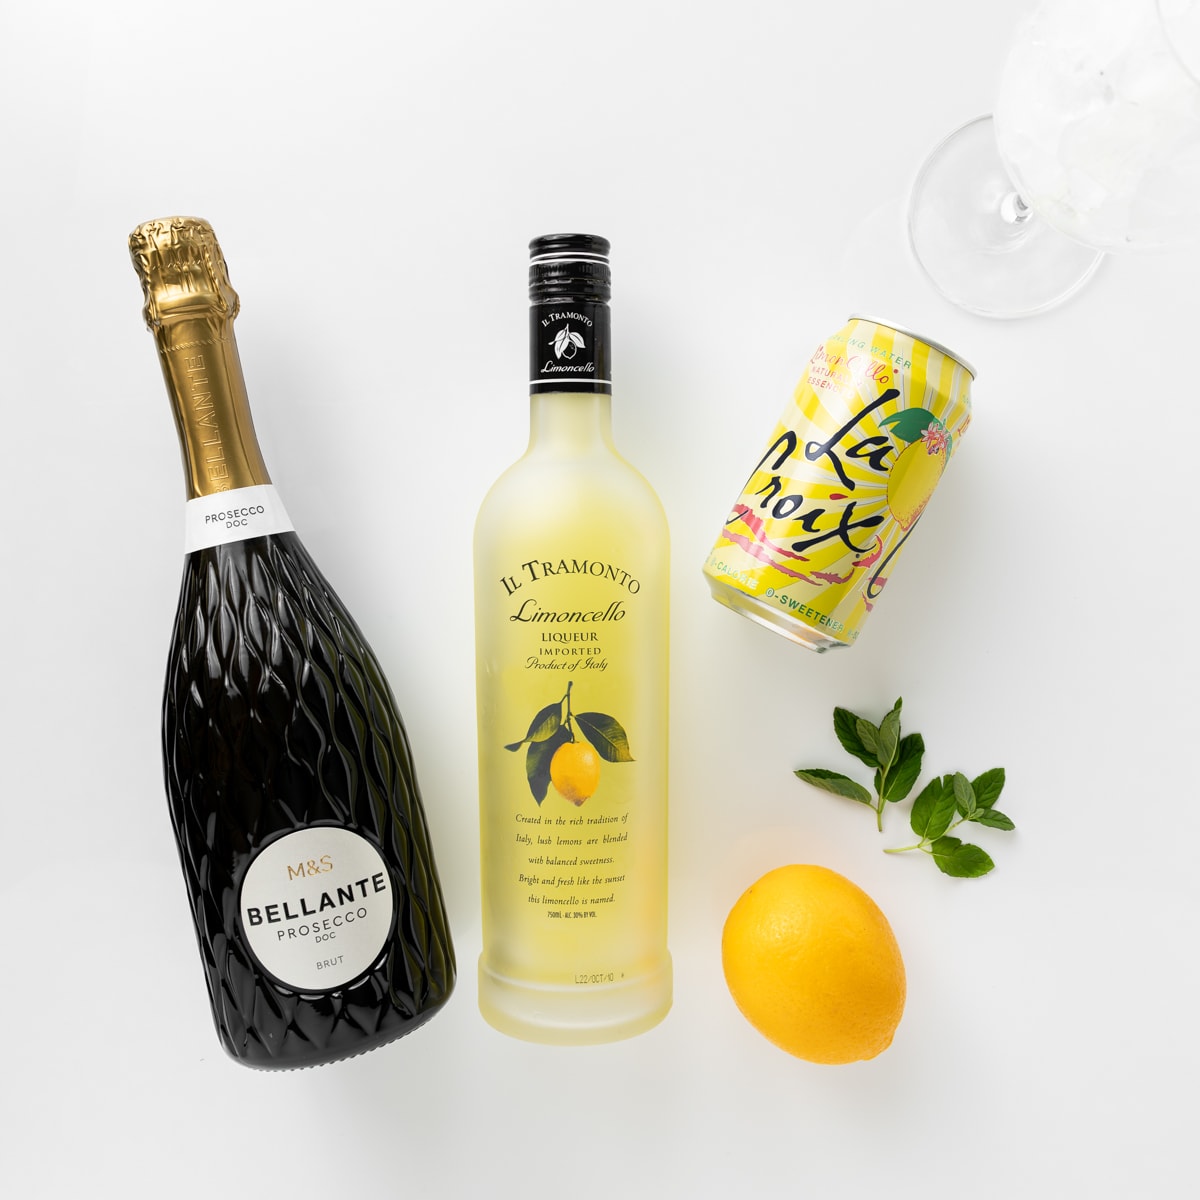 Ingredients for limoncello spritz. Bottle of prosecco, limoncello liqueur, Lax Croix sparkling water, fresh lemon and two sprigs of mint.  